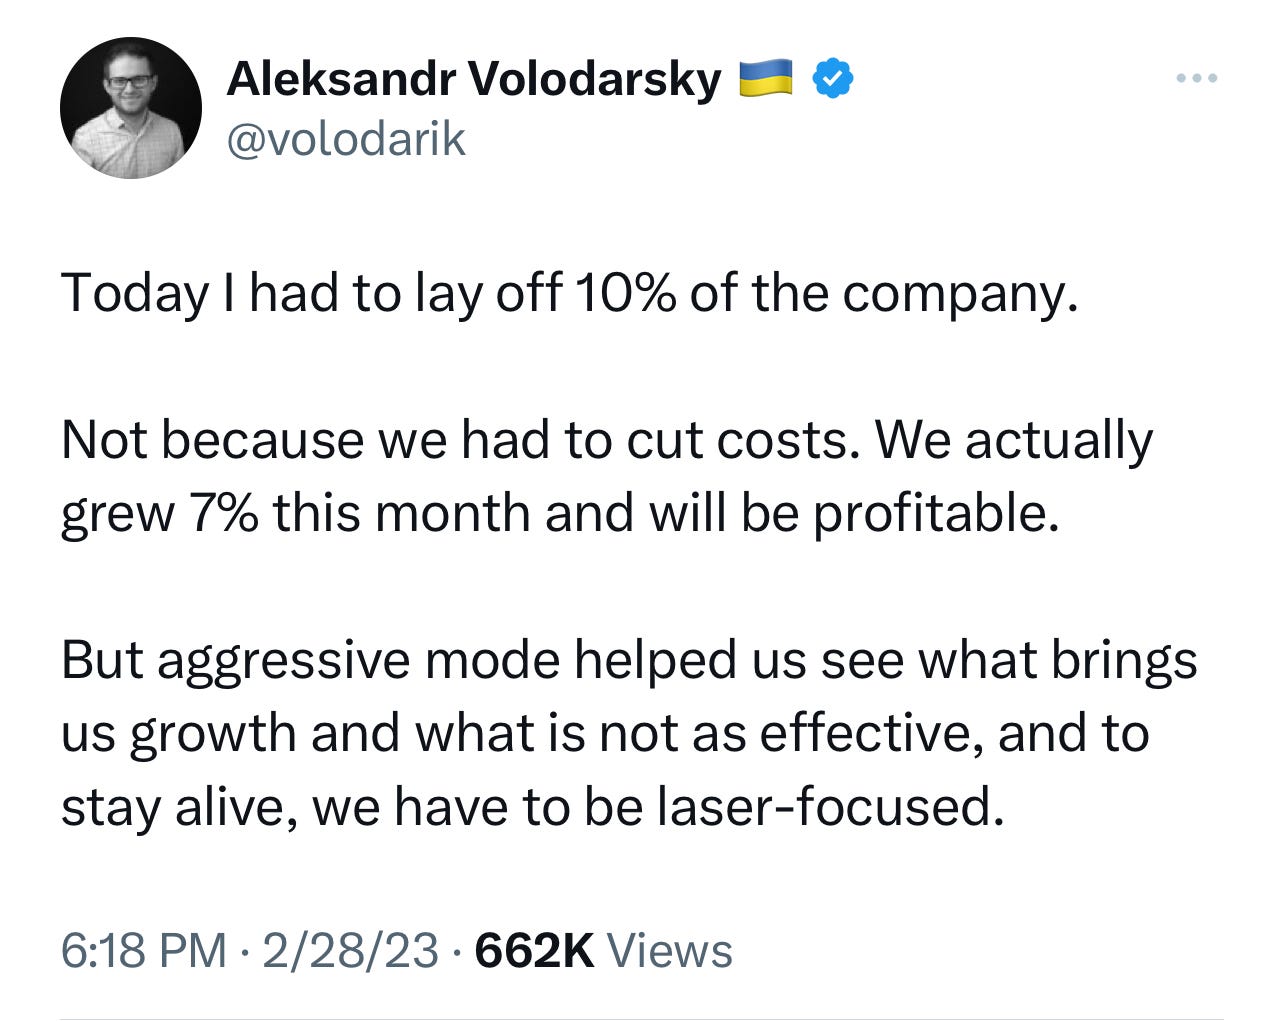 Tweet text: Today I had to lay off 10% of the company.   Not because we had to cut costs. We actually grew 7% this month and will be profitable.  But aggressive mode helped us see what brings us growth and what is not as effective, and to stay alive, we have to be laser-focused.